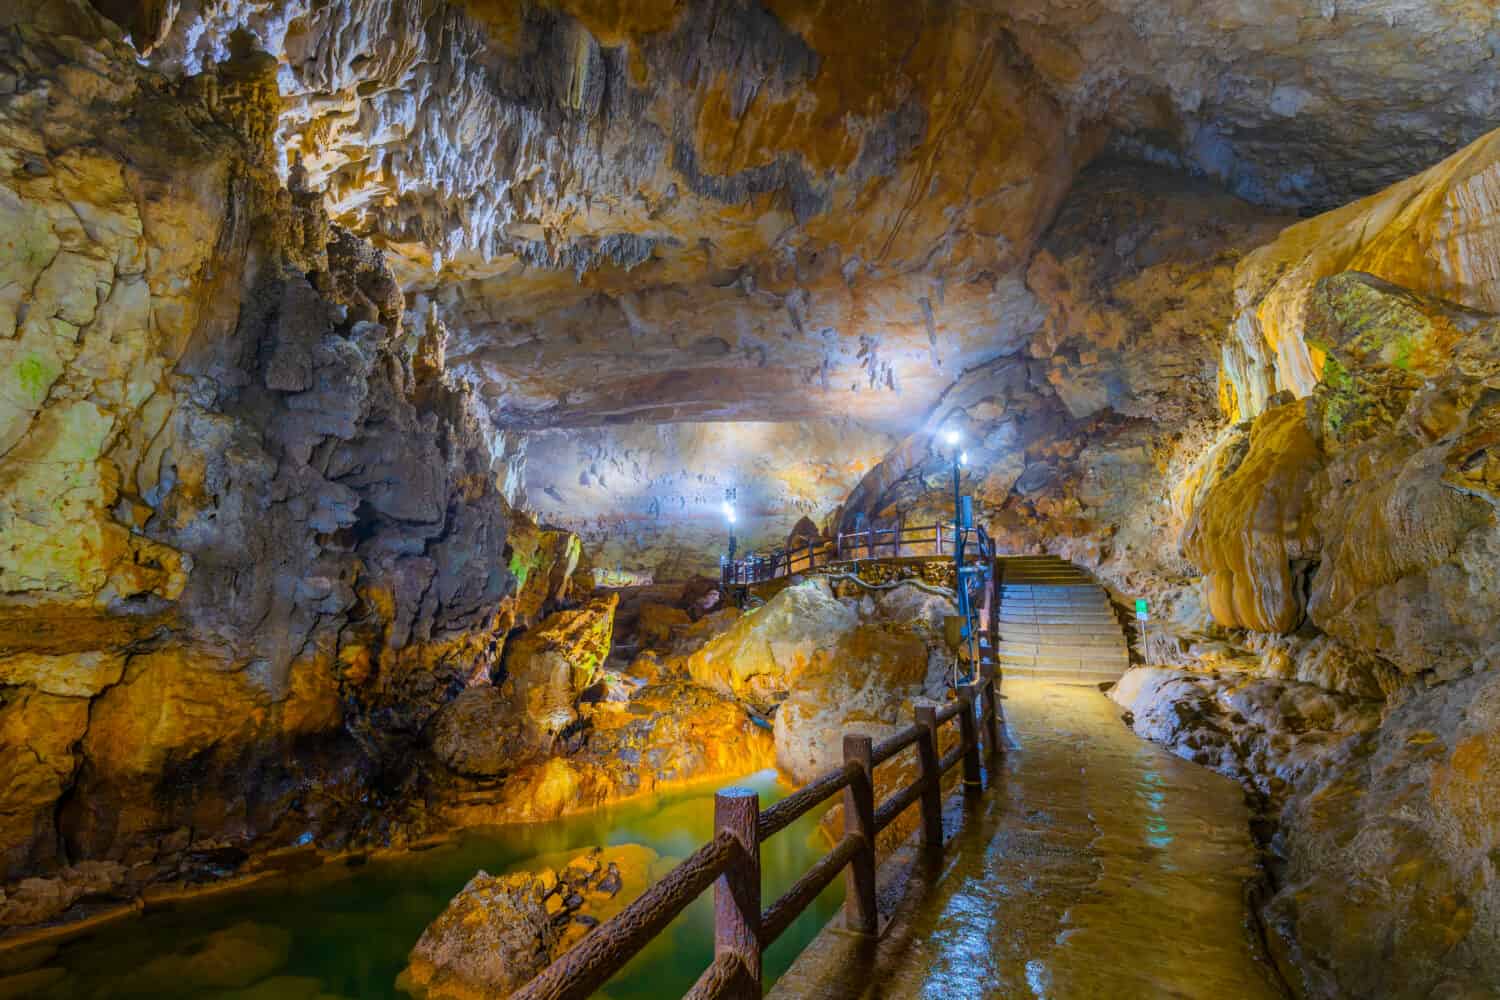 Akiyoshido Cave Yamaguchi in Japan.This is one of Japan’s largest limestone caves.